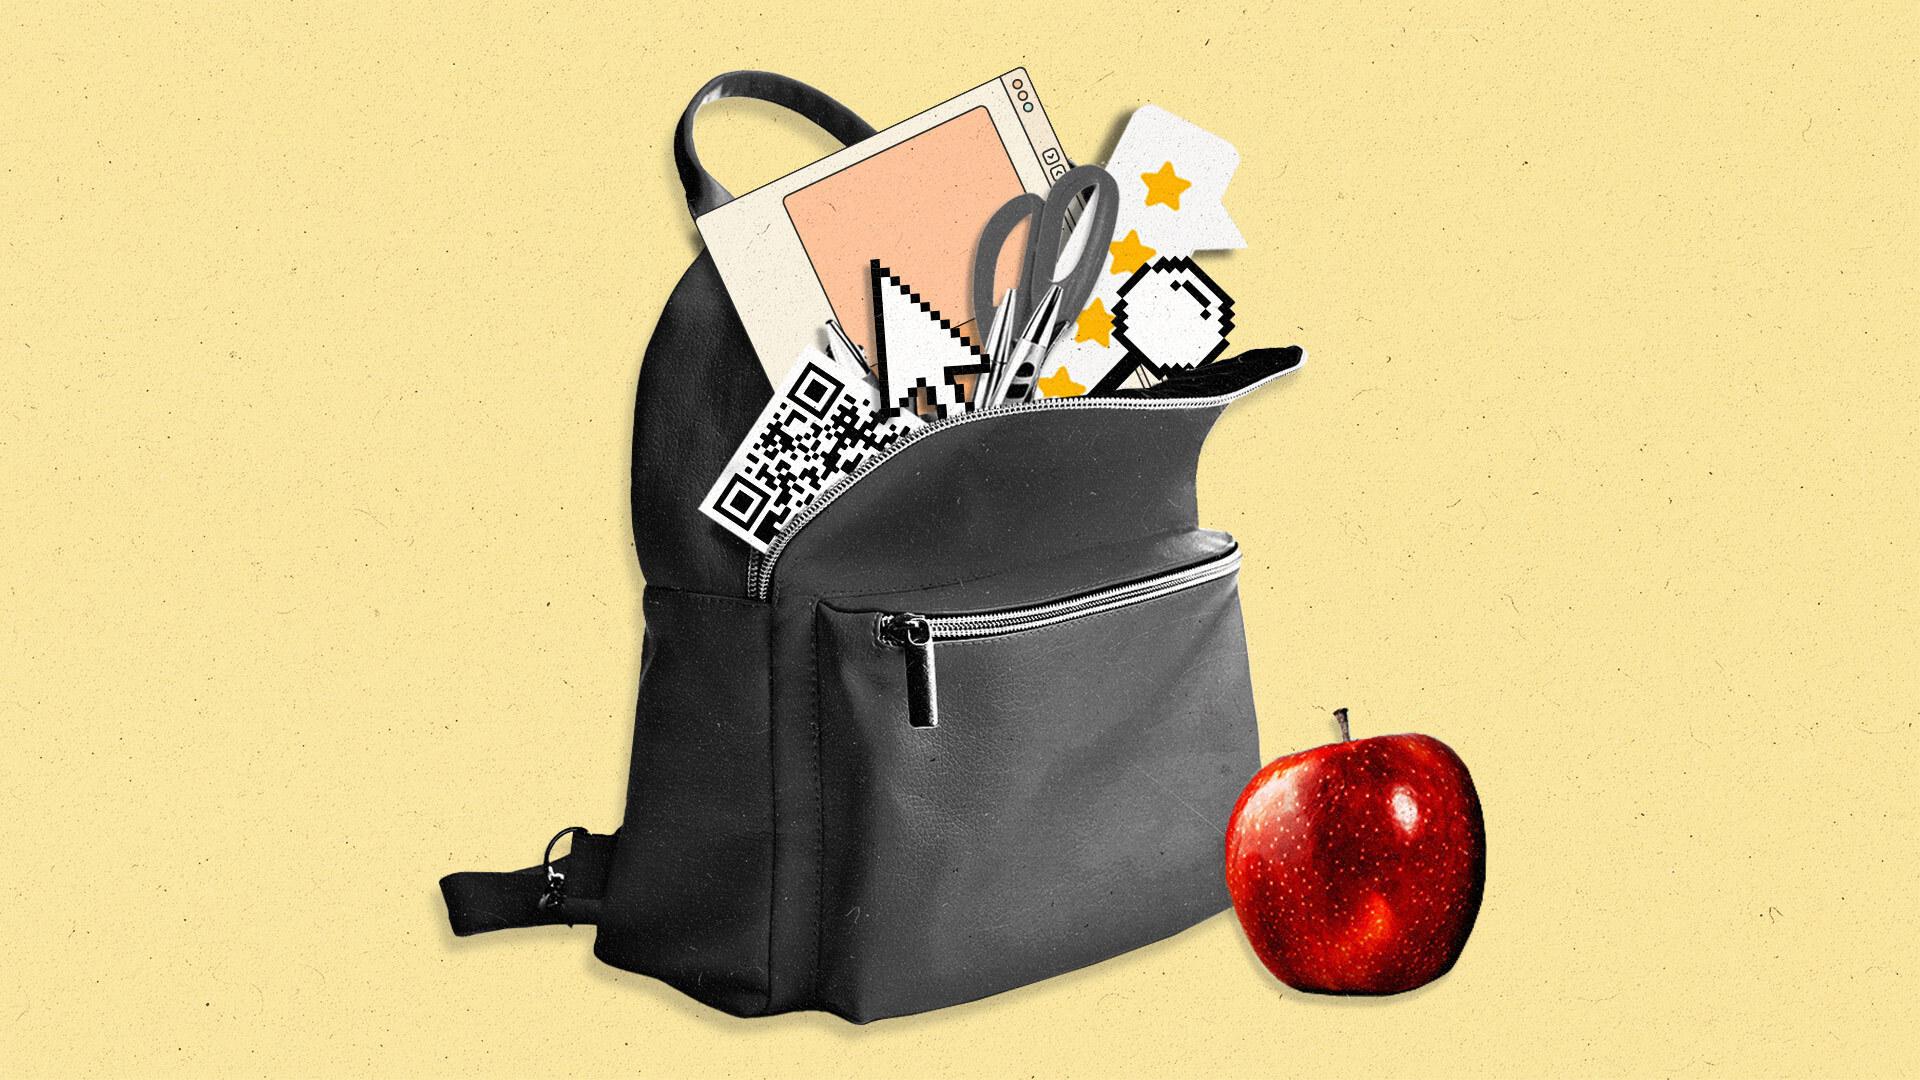 Backpack filled with a QR code, computer cursor, magnifying glass, and scissors with a red apple next to the bag.